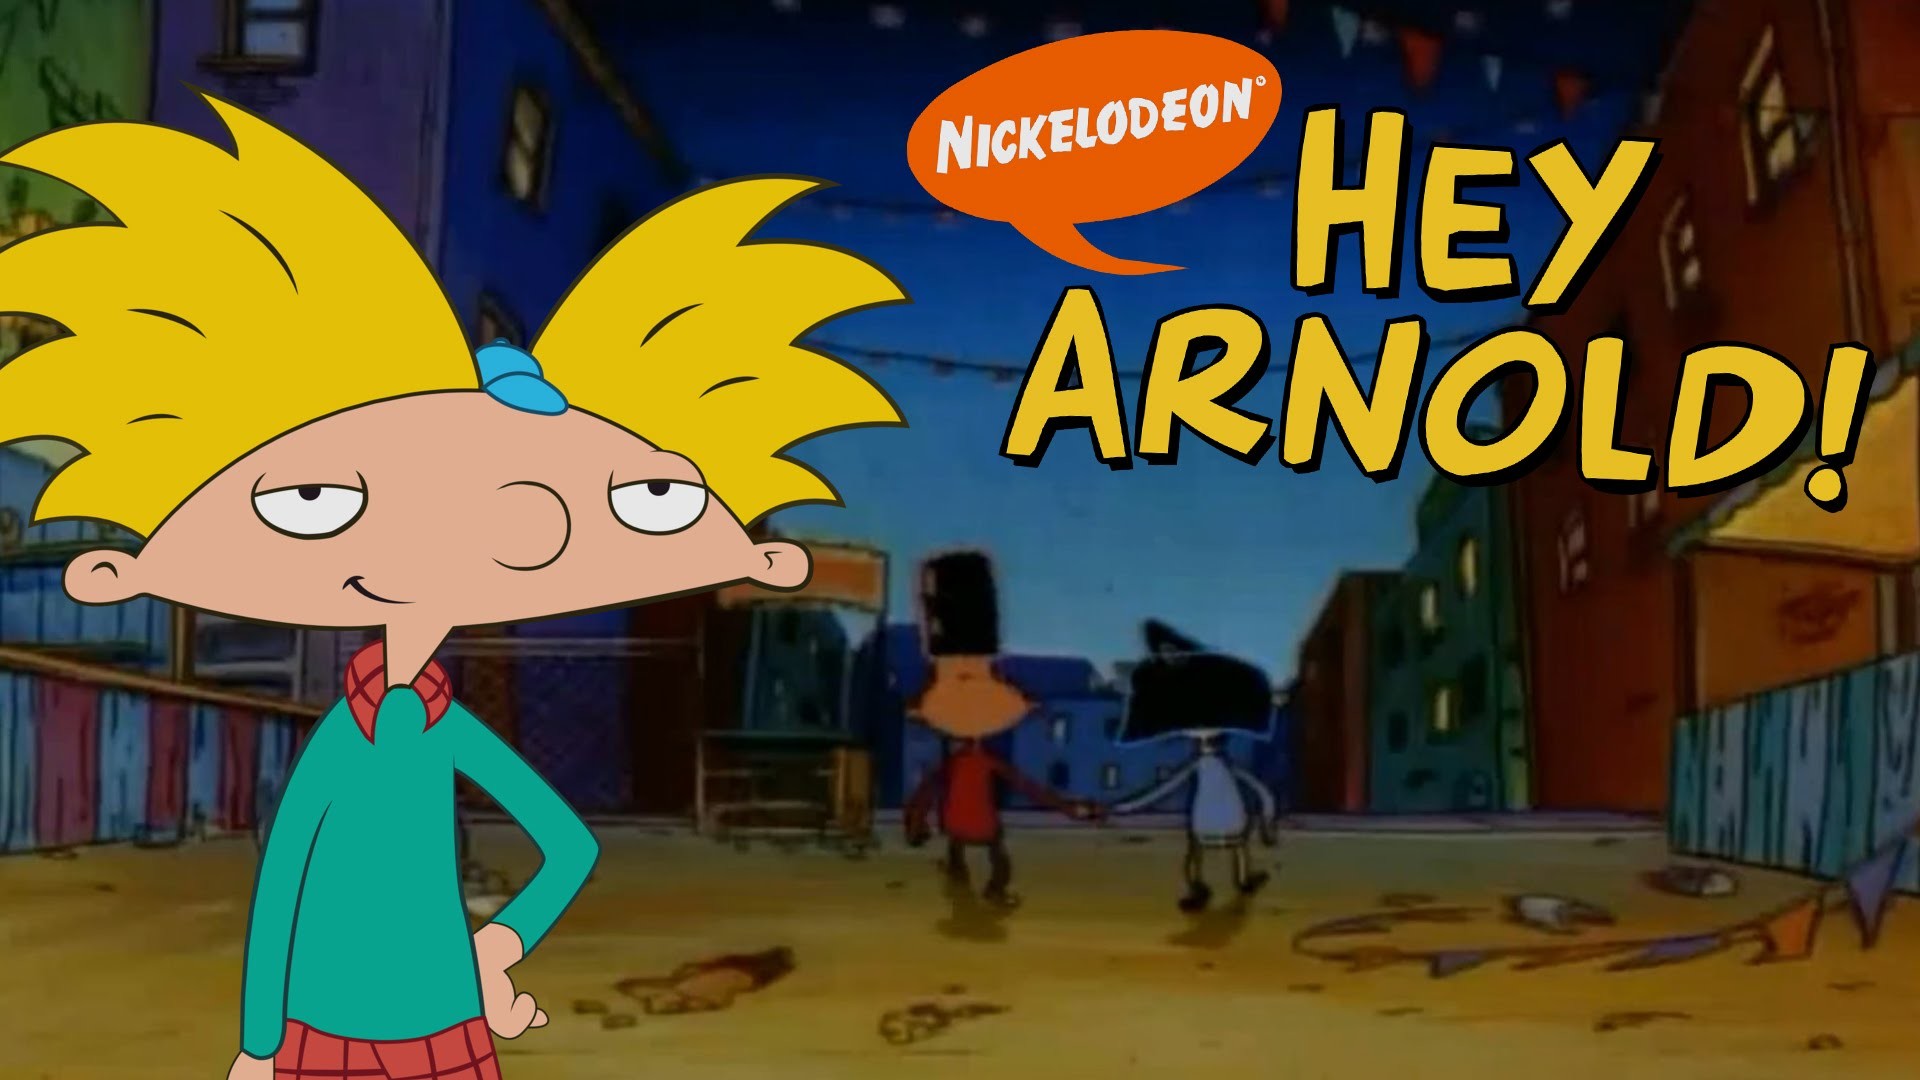 1920x1080 ... Hot Hey Arnold Photos, Pictures | Hey Arnold Quality Pics ...